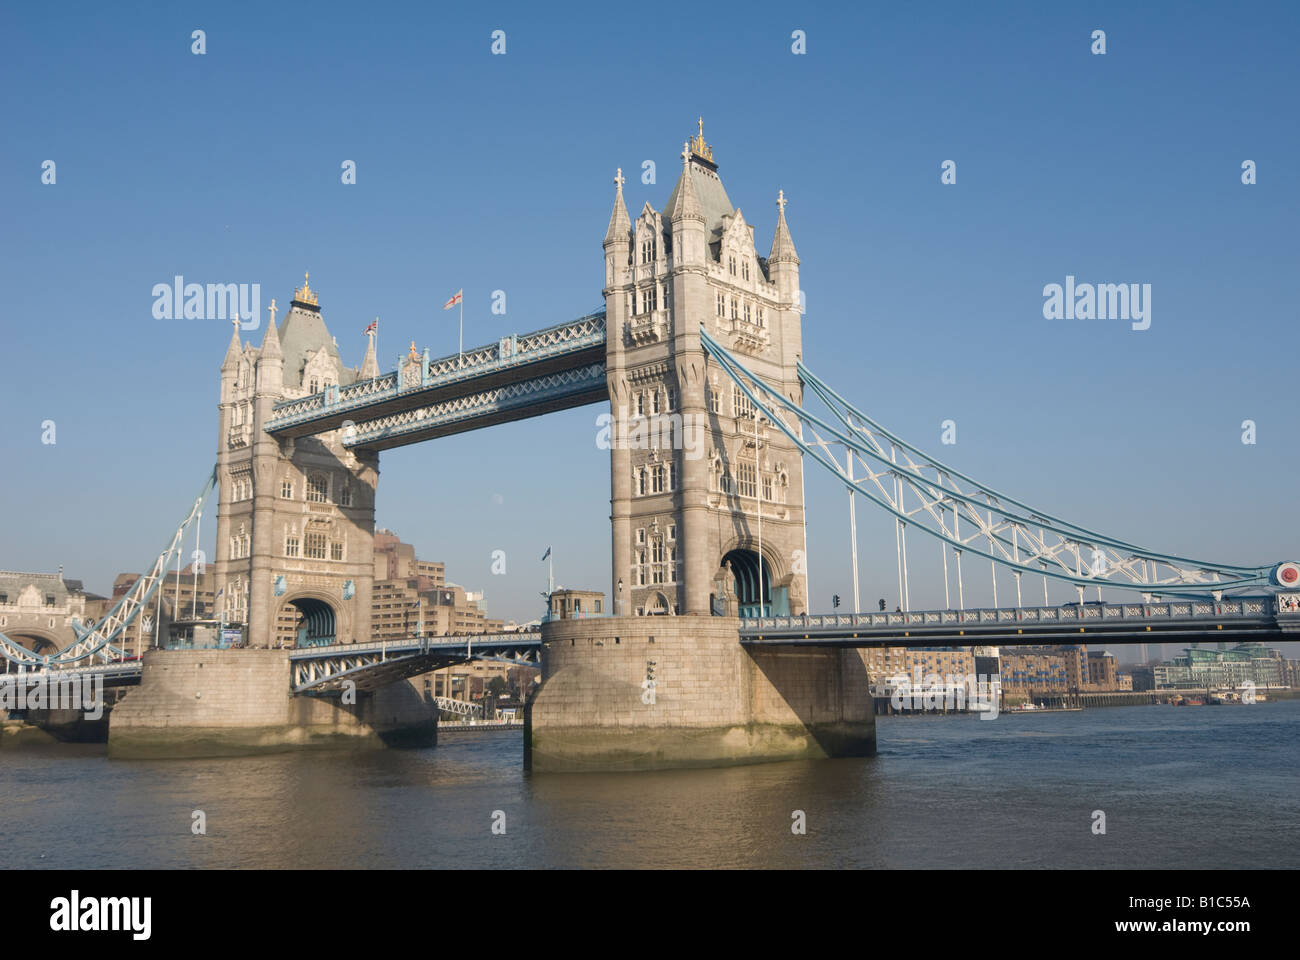 Tower Bridge, spanning the River Thames in the capital city of London, England. Stock Photo